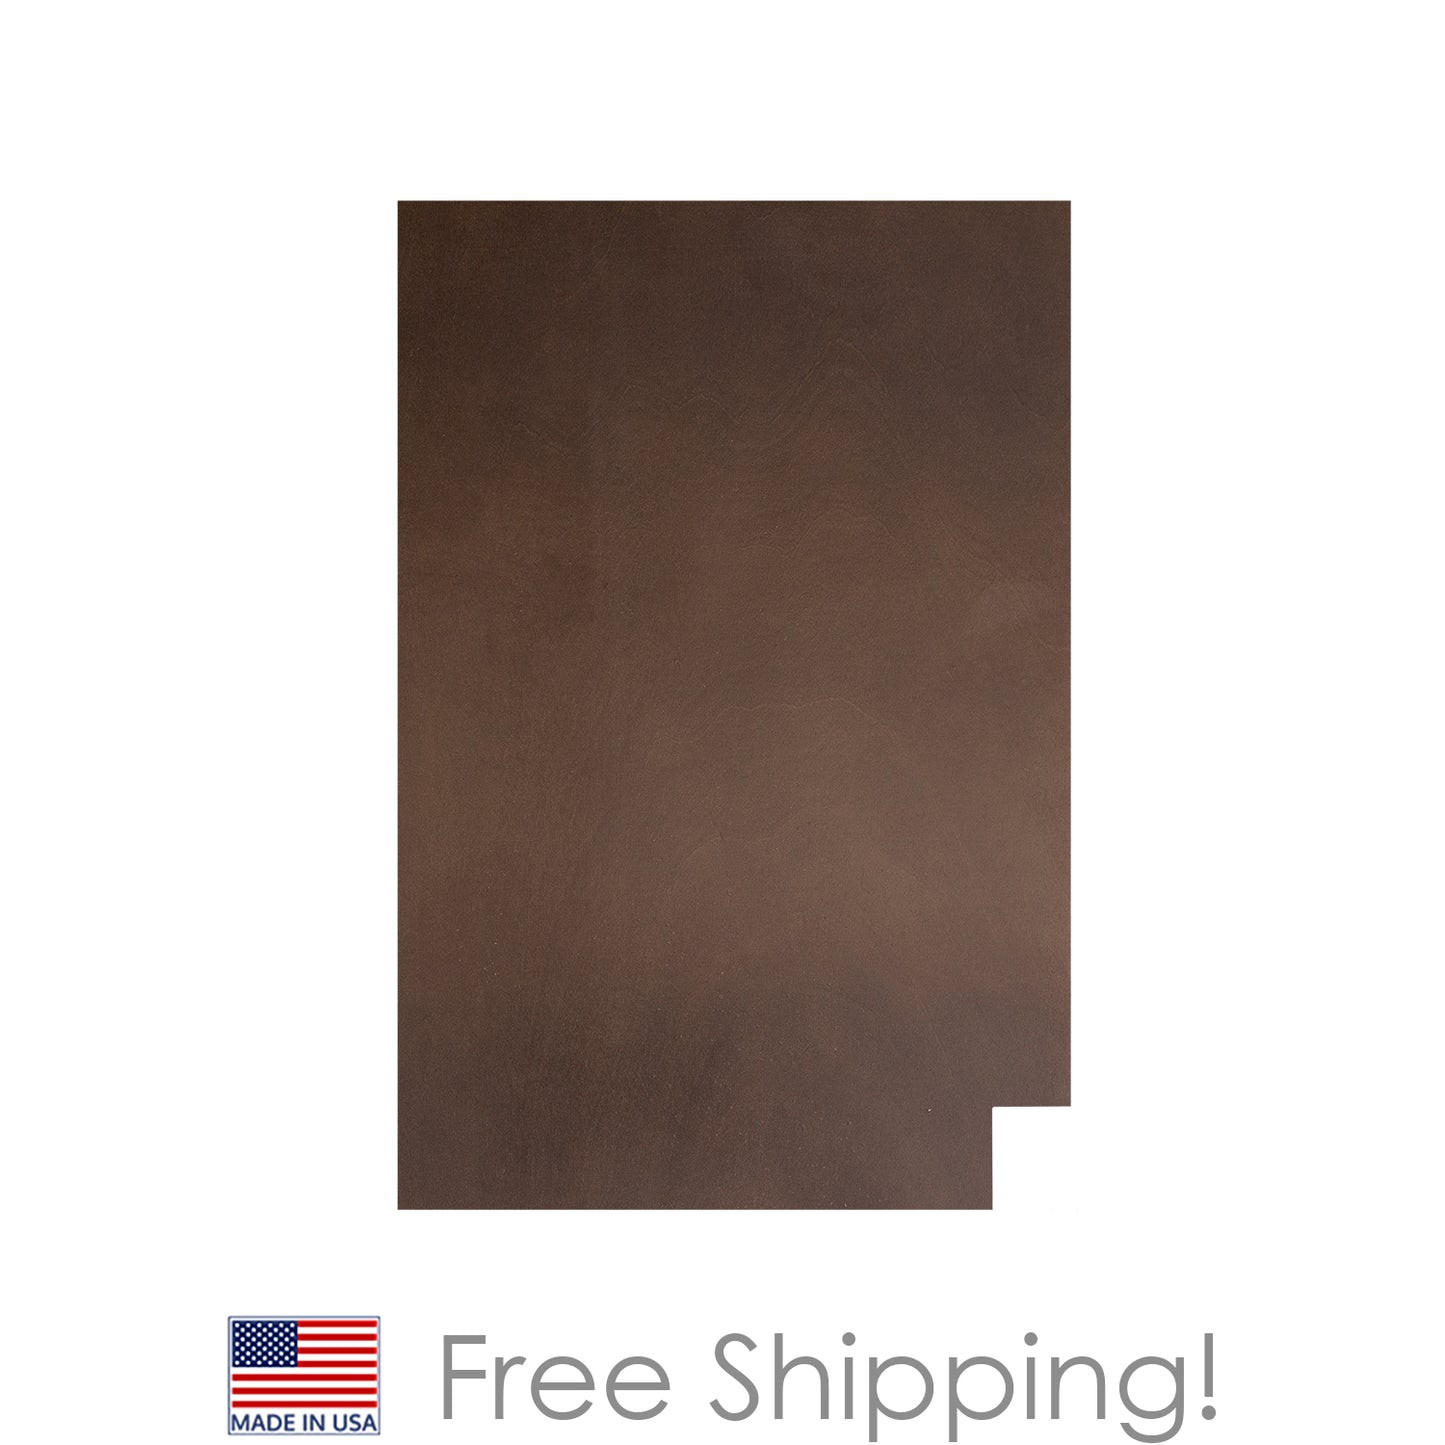 Quicklock RTA (Ready-to-Assemble) Espresso Stain .25"X23.25"X34.5" End Panel - Left Side